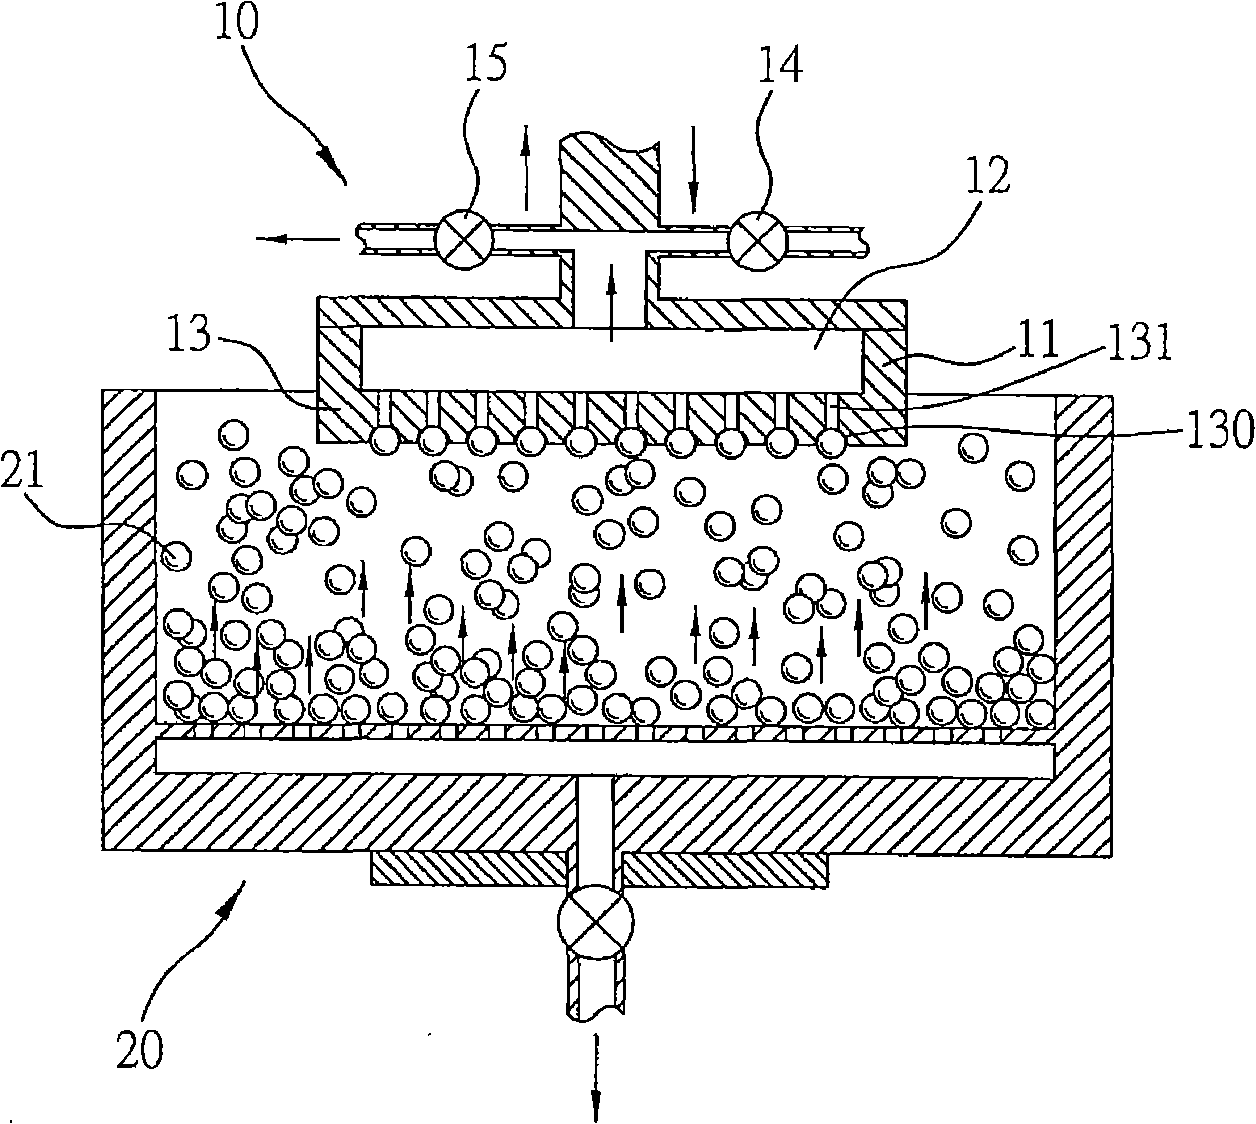 Equipment for soldering and planting ball as well as acquisition apparatus